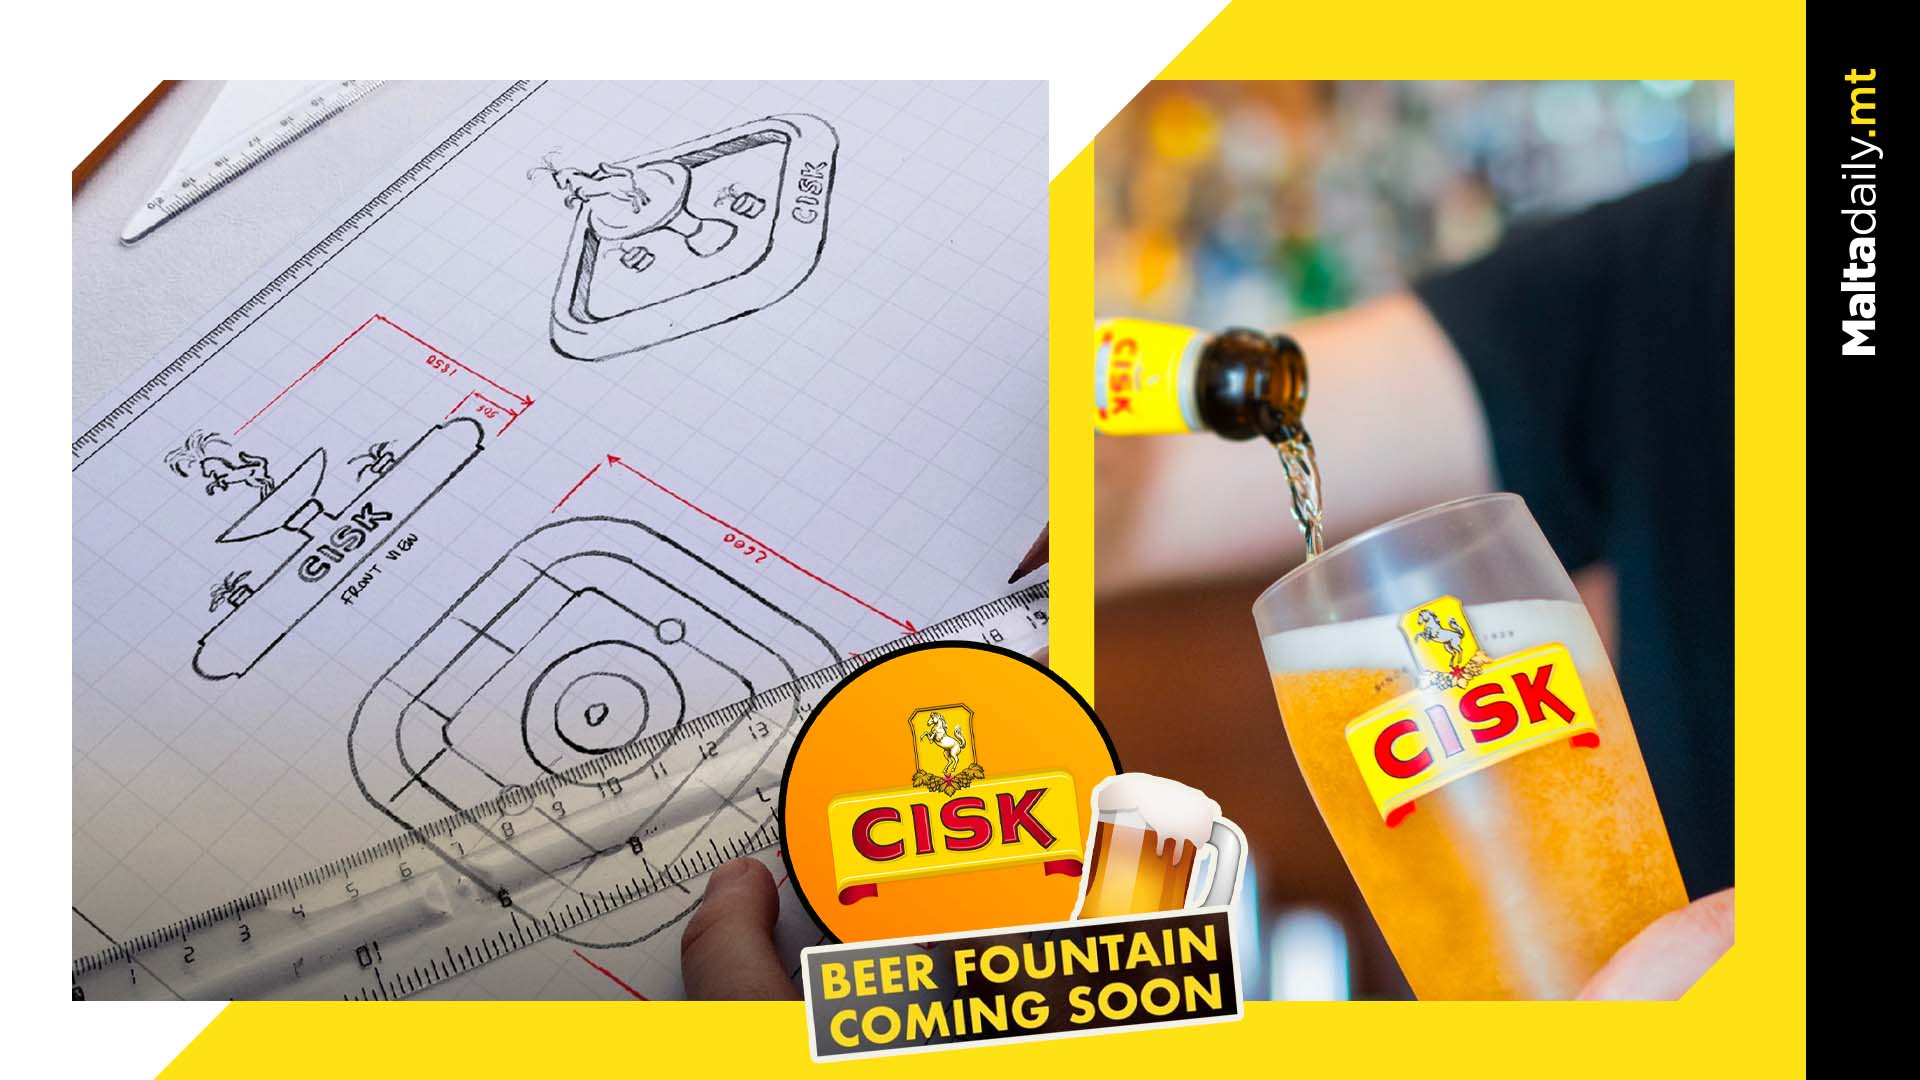 Is Cisk actually teasing a beer fountain?